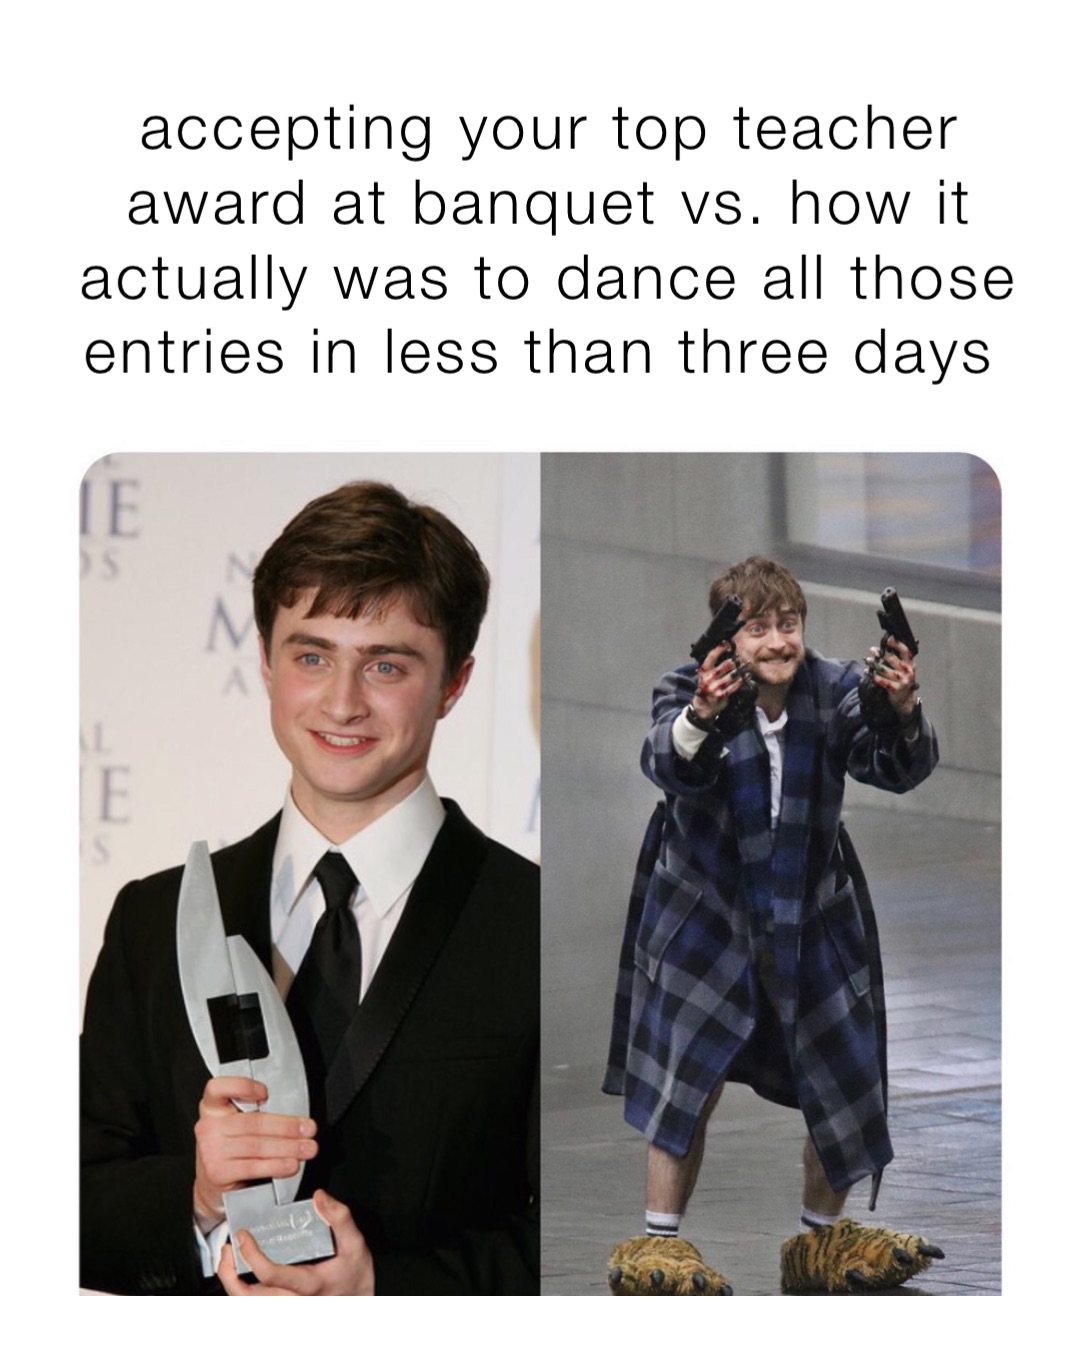 accepting your top teacher award at banquet vs. how it actually was to dance all those entries in less than three days